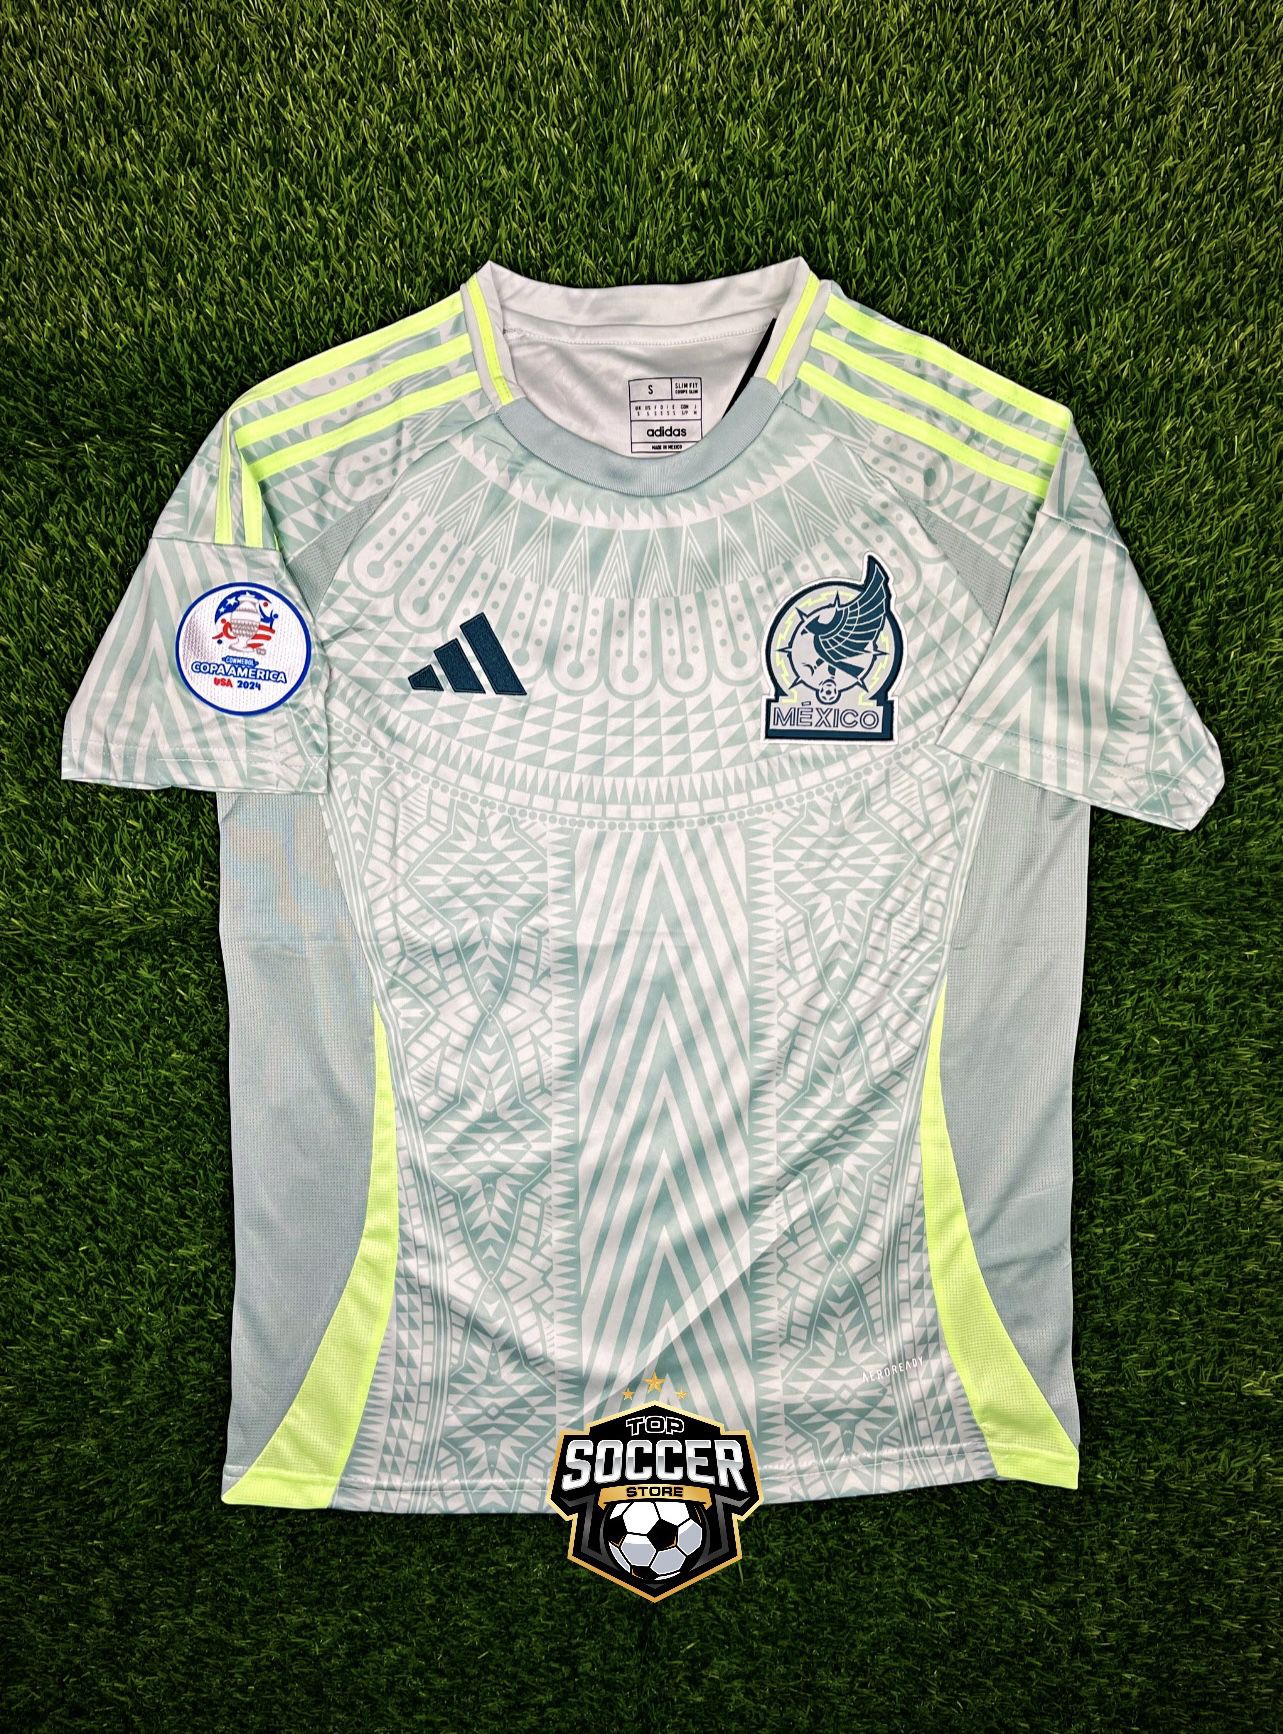 WEEKLY SALE! NEW MEXICO AWAY COPA AMÉRICA MEN’S JERSEY!